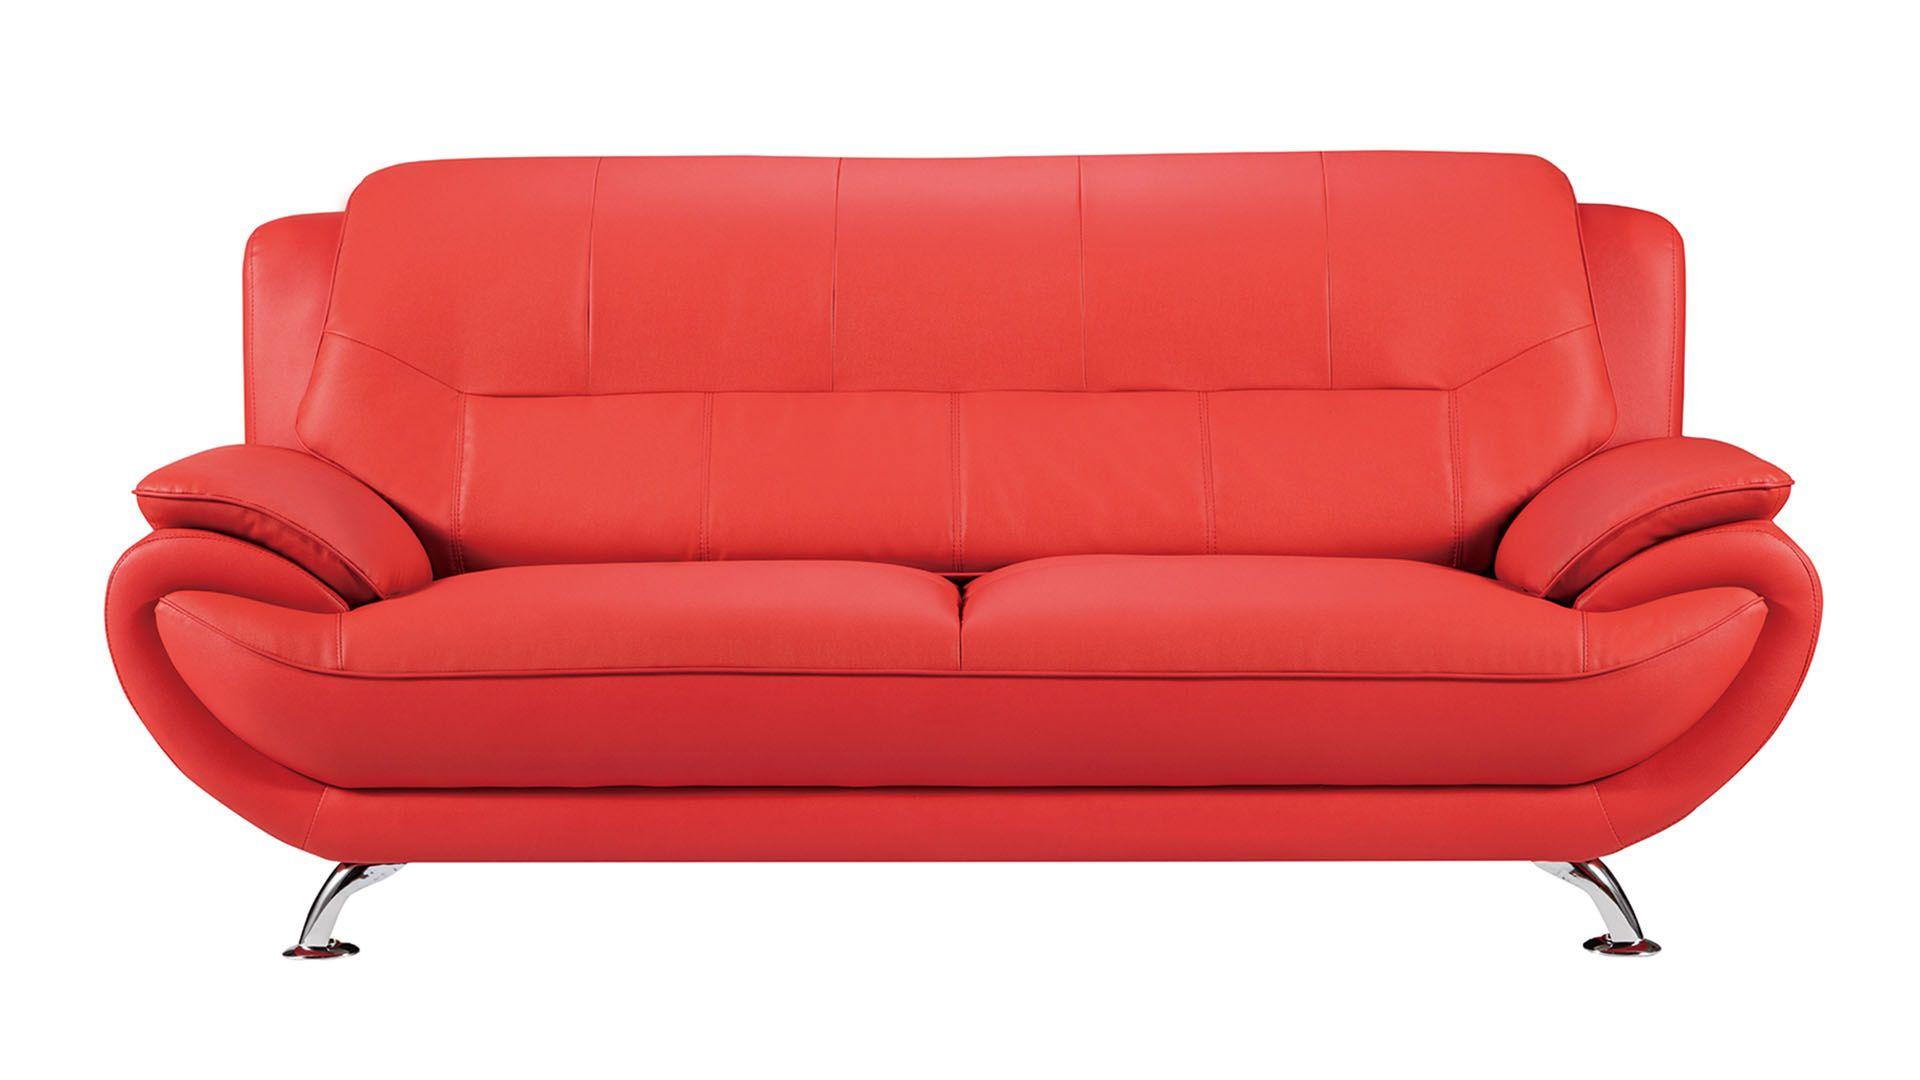 

    
Red Faux Leather Sofa Set 2Pcs AE208-RED American Eagle Modern Contemporary
